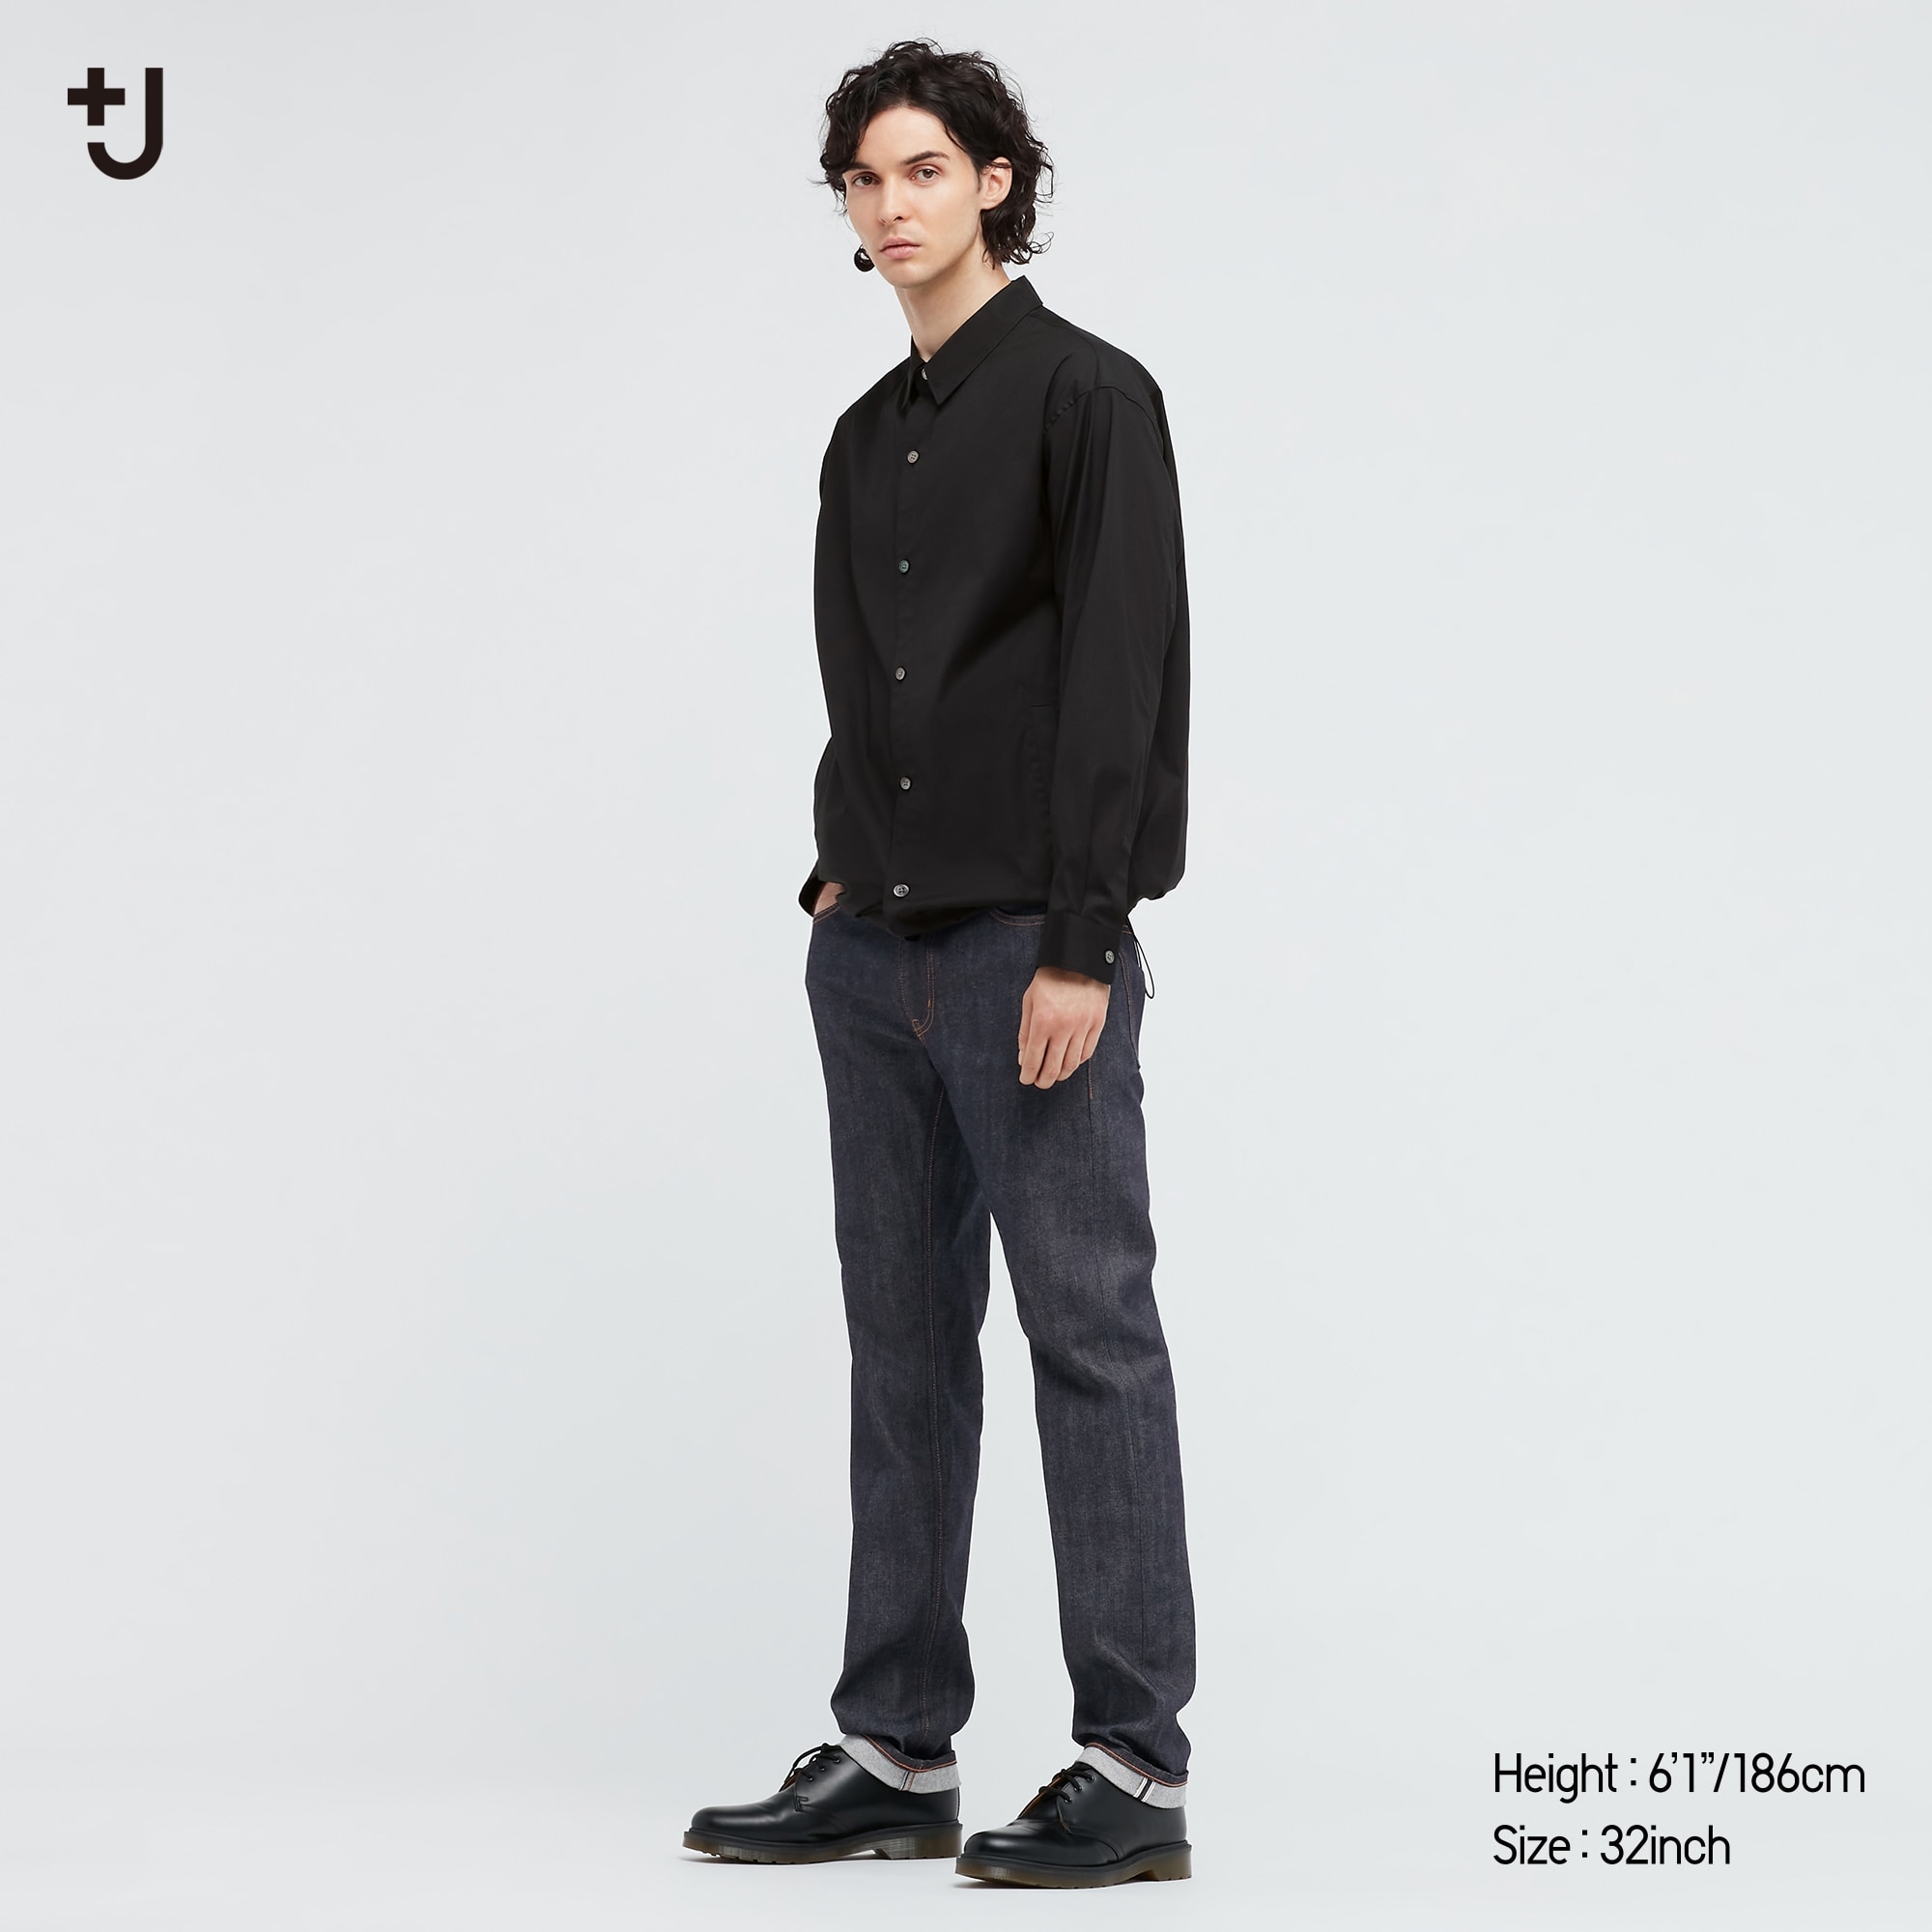 Uniqlo J Selvedge Slim Fit Straight Jeans Mens Fashion Bottoms Jeans  on Carousell